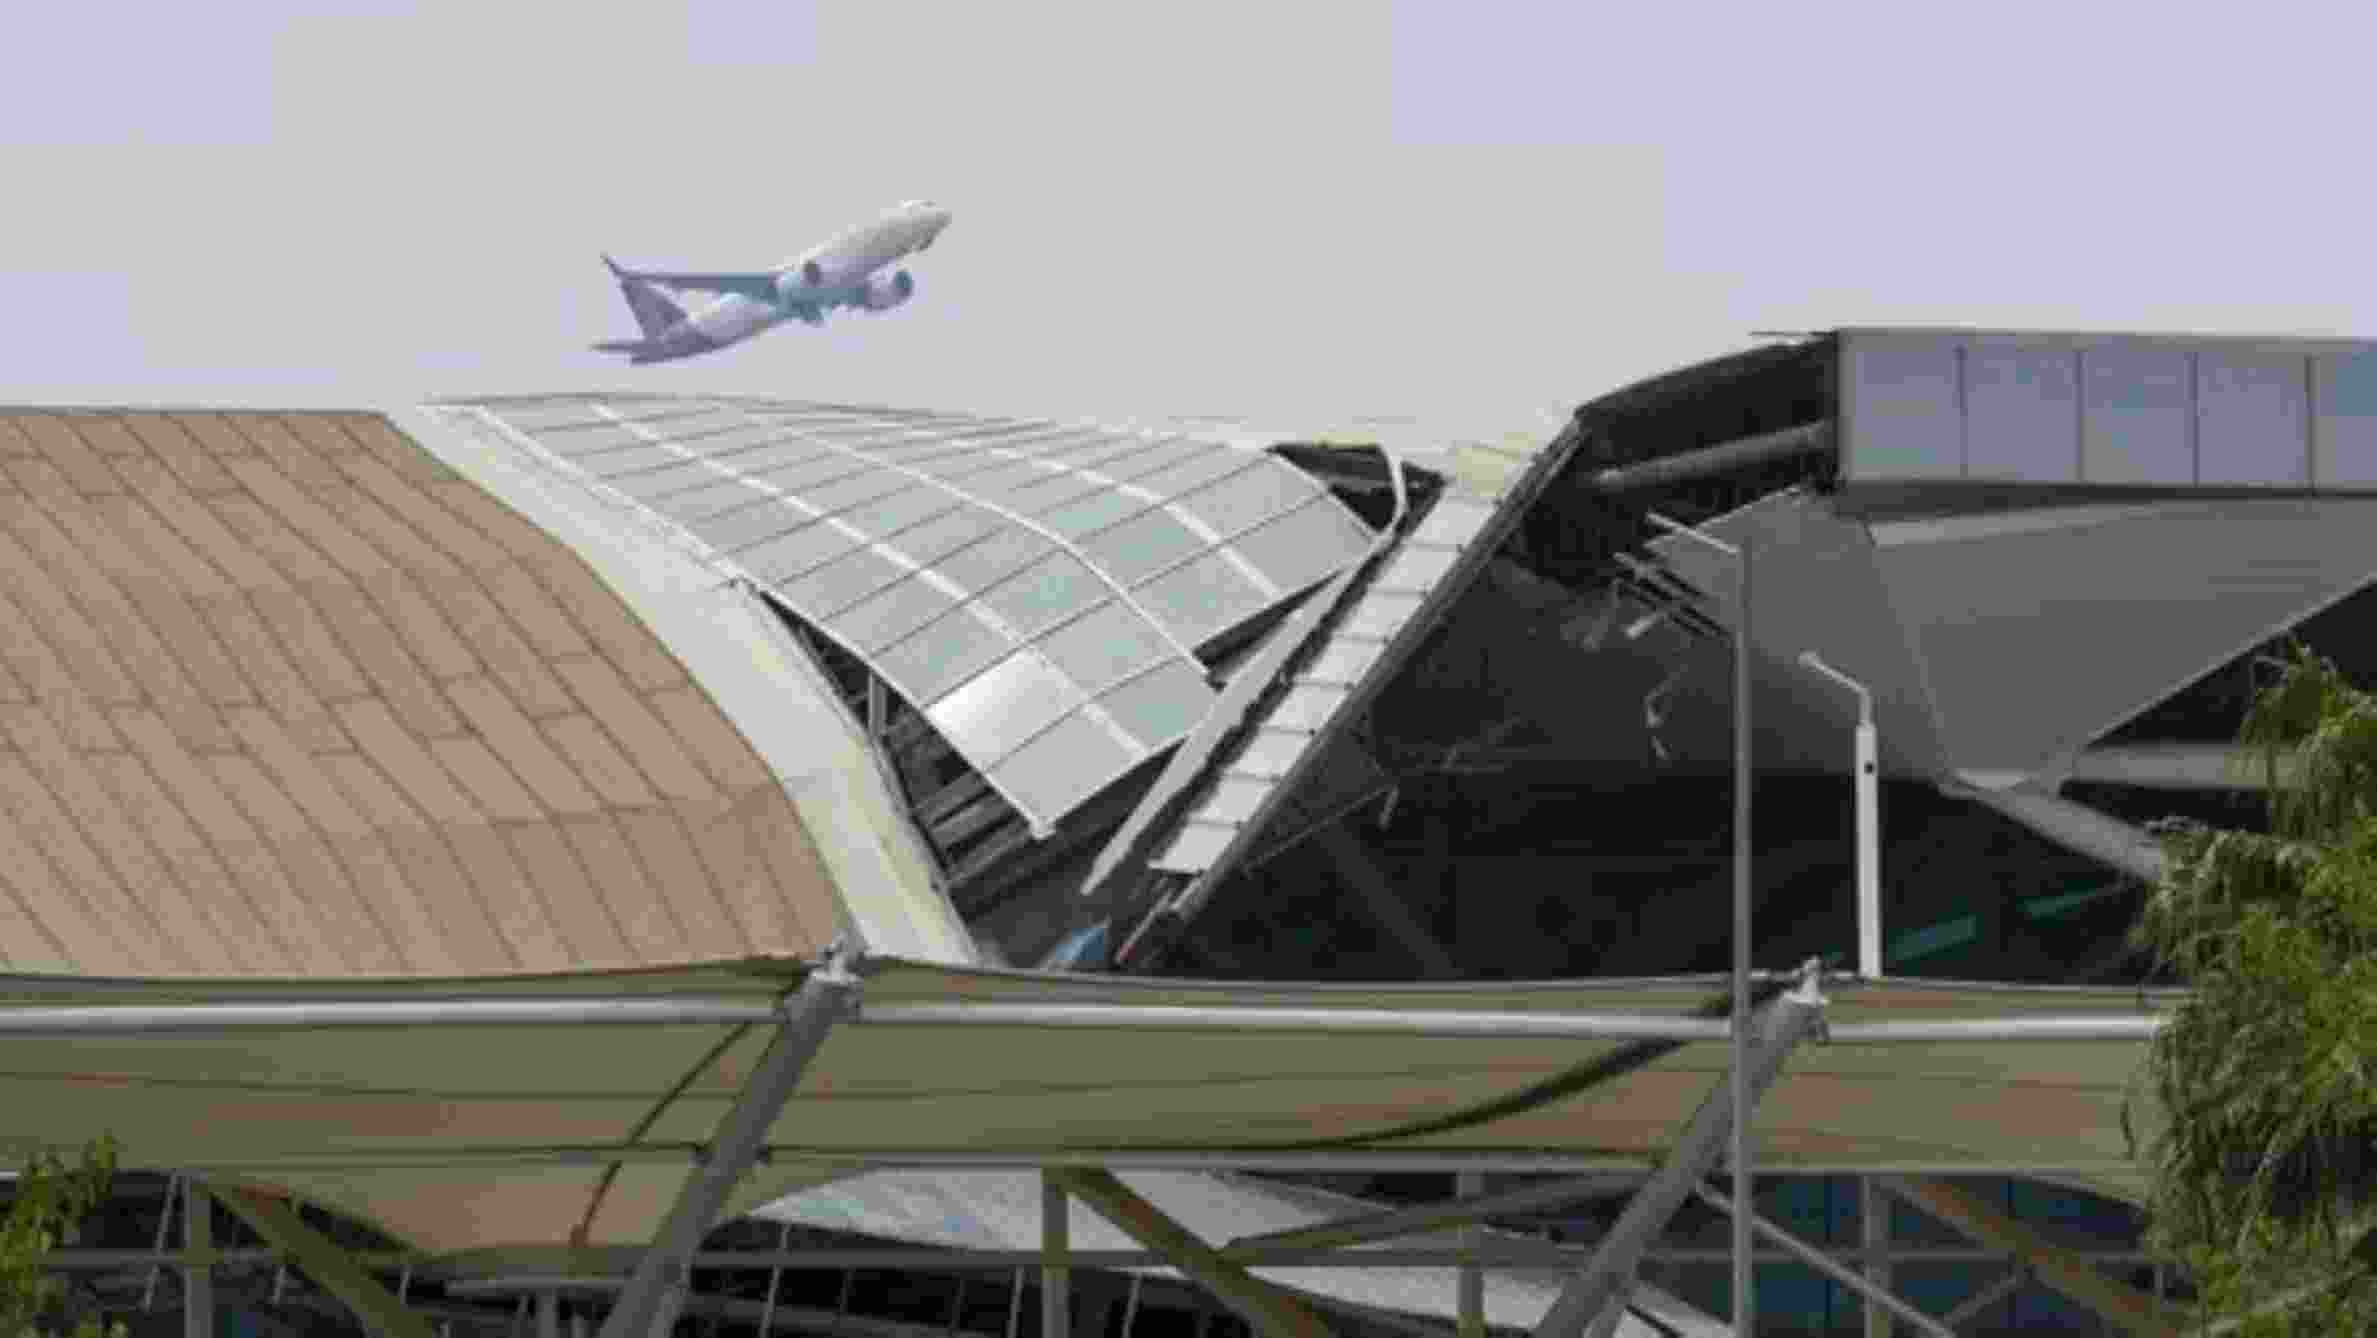 An official from the Civil Aviation Ministry said structural engineers were being engaged from IIT Delhi to do an independent assessment of the roof collapse incident at T1 and they are expected to complete the assessment in one month.